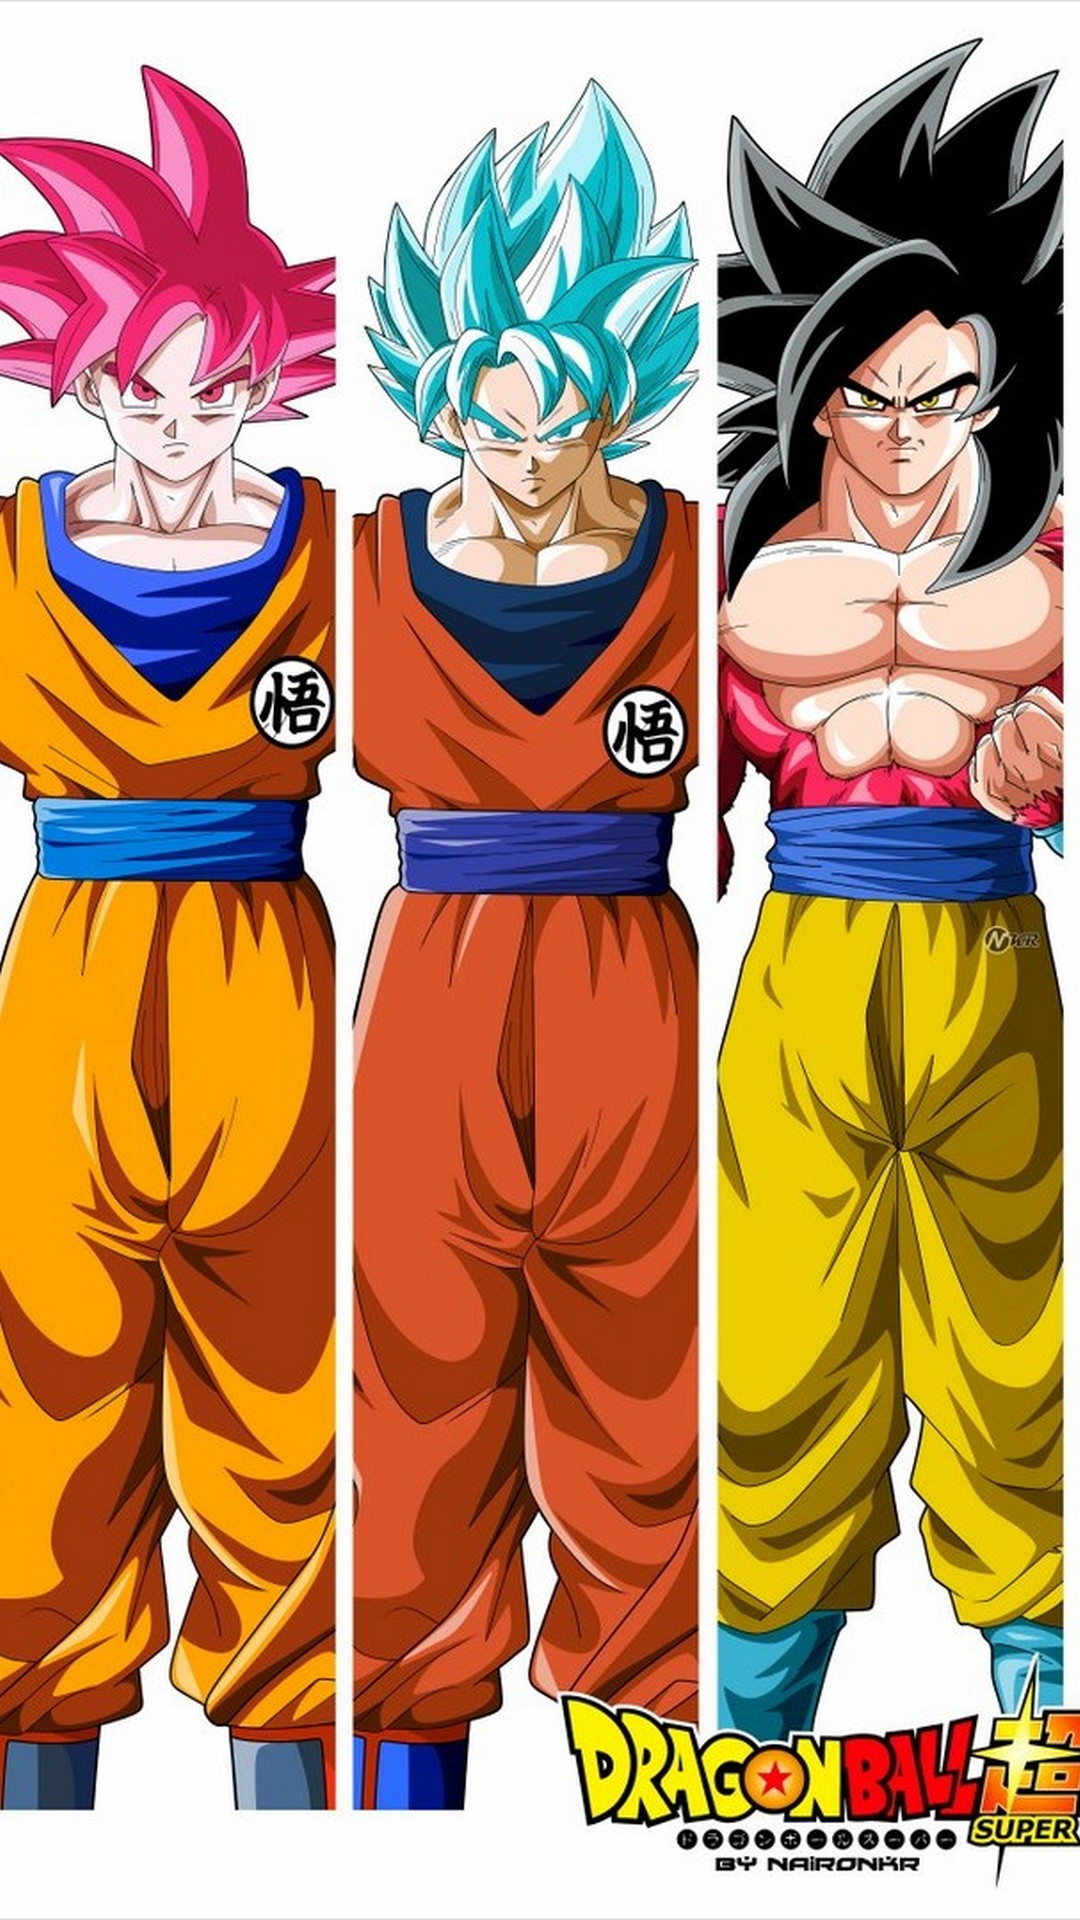 Wallpaper Mobile Goku with high-resolution 1080x1920 pixel. You can use and set as wallpaper for Notebook Screensavers, Mac Wallpapers, Mobile Home Screen, iPhone or Android Phones Lock Screen